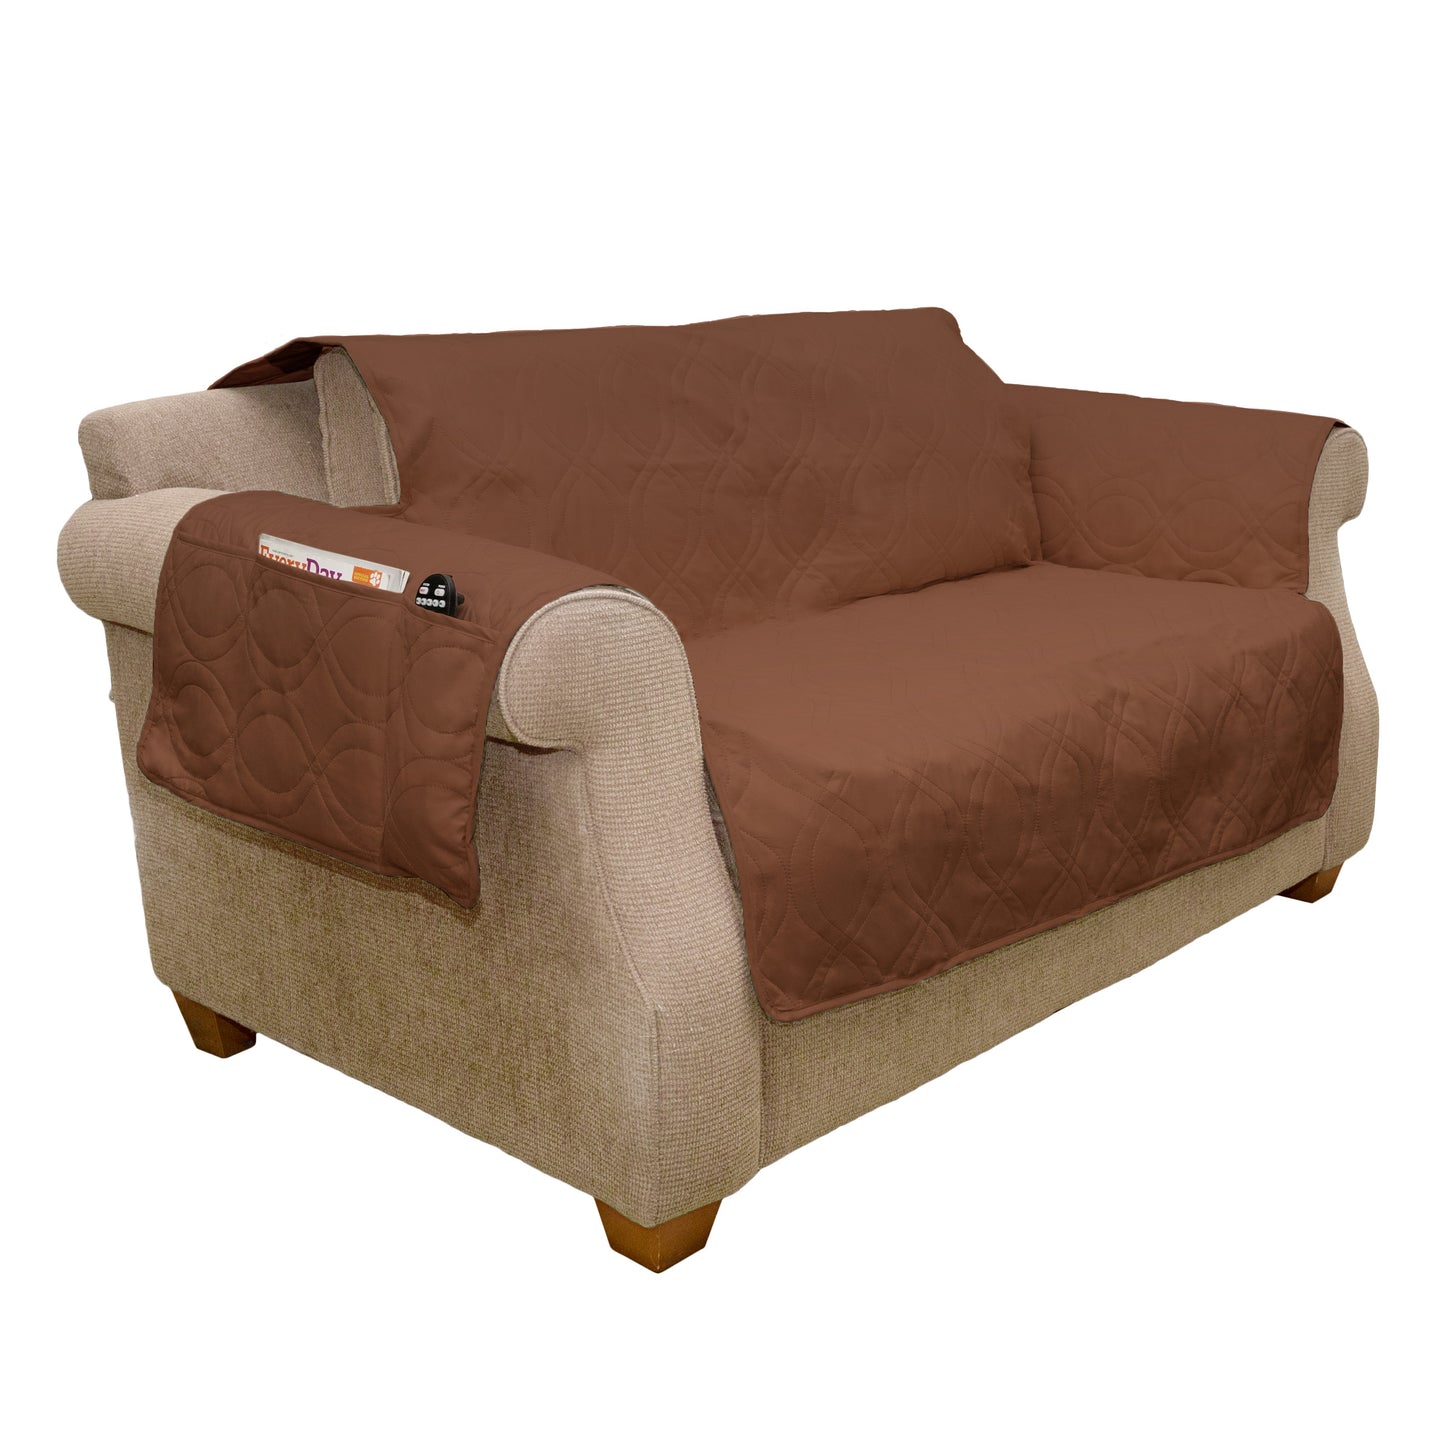 100% Cotton Non-Slip Couch Cover & Furniture Protector - Brown - Washable 2-Seater Slipcover Coverage for Sofas, Sectionals, Settees